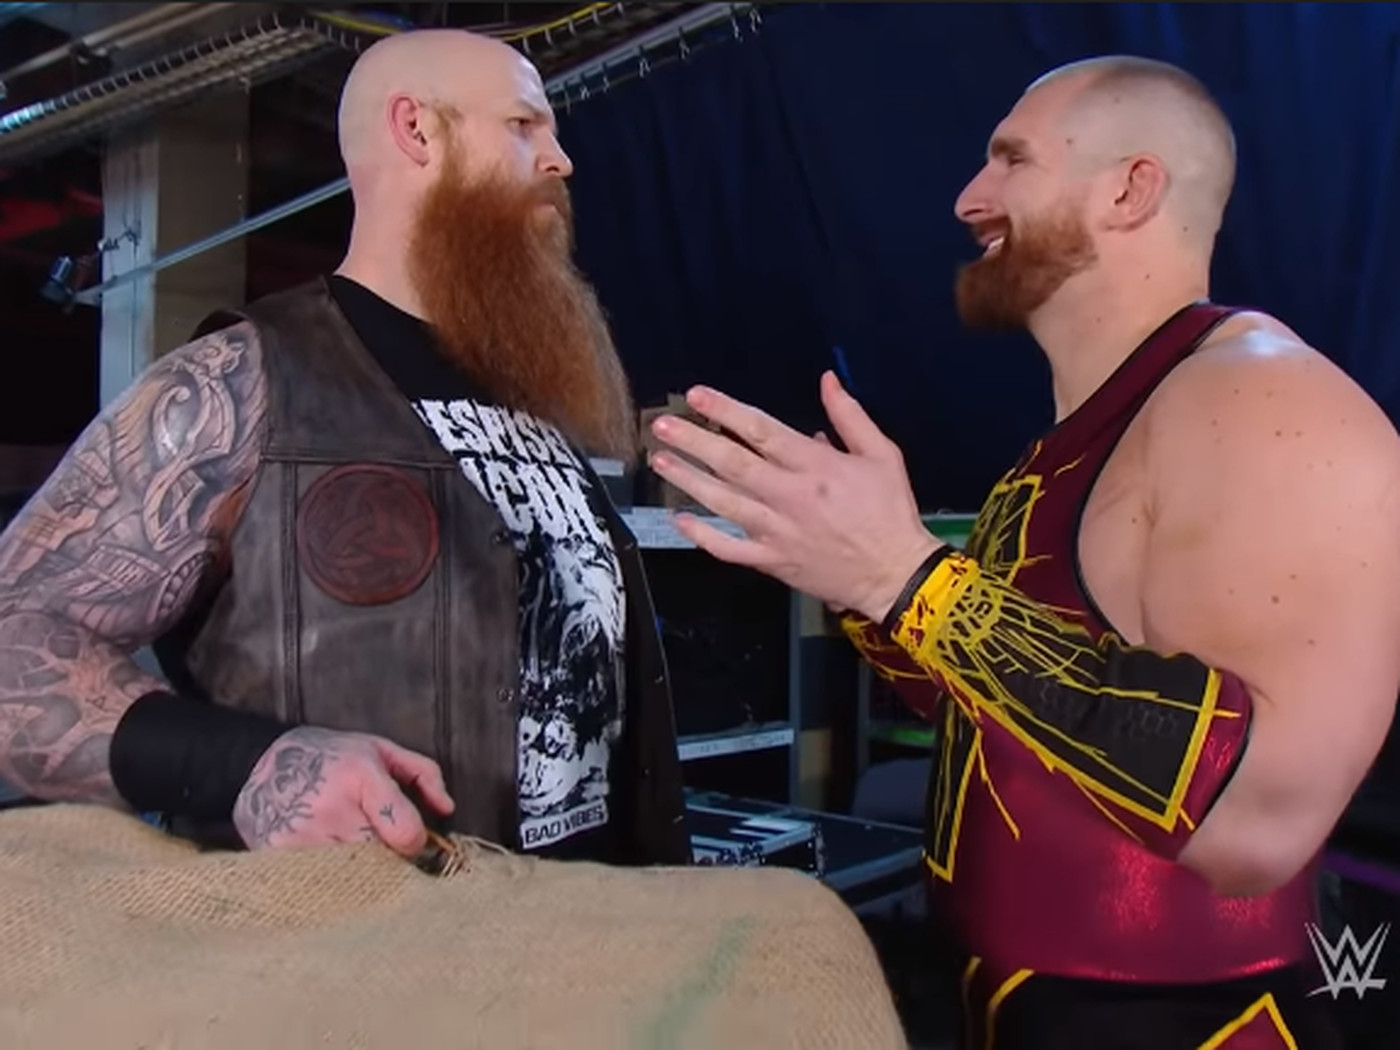 This Erick Rowan story is actually incredible